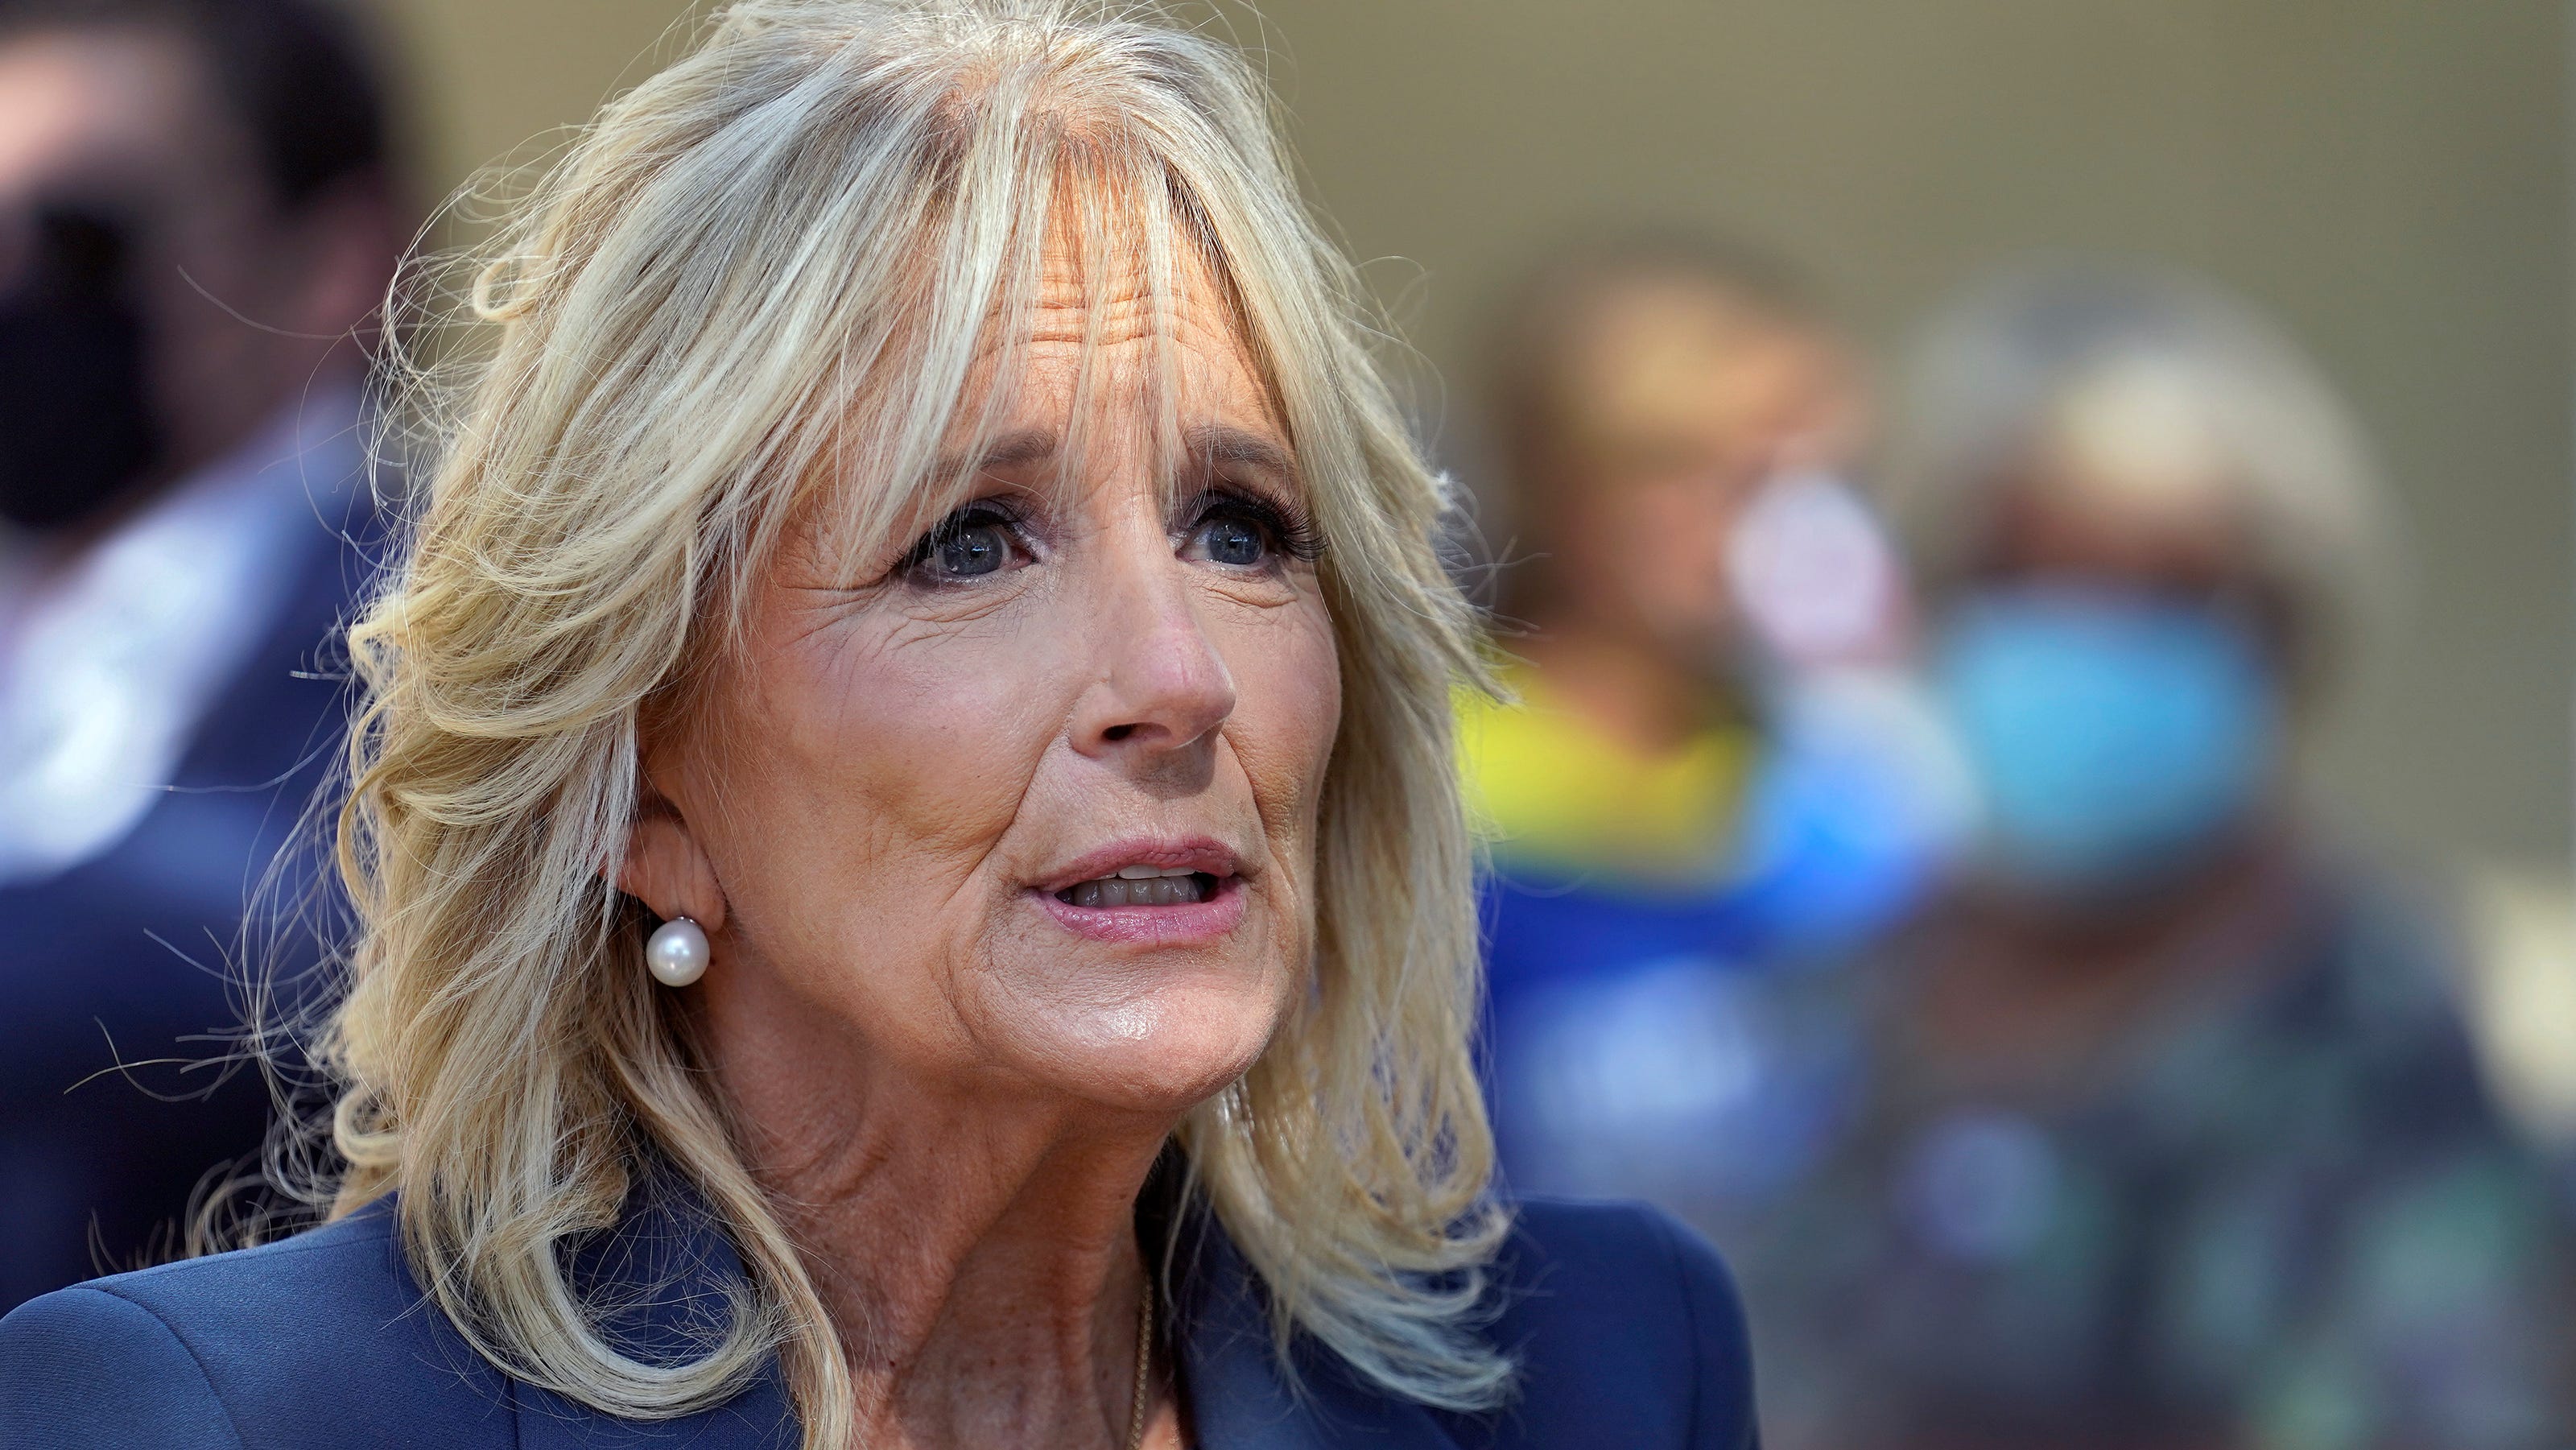 Jill Biden's staff to monitor task force to reunite separated families